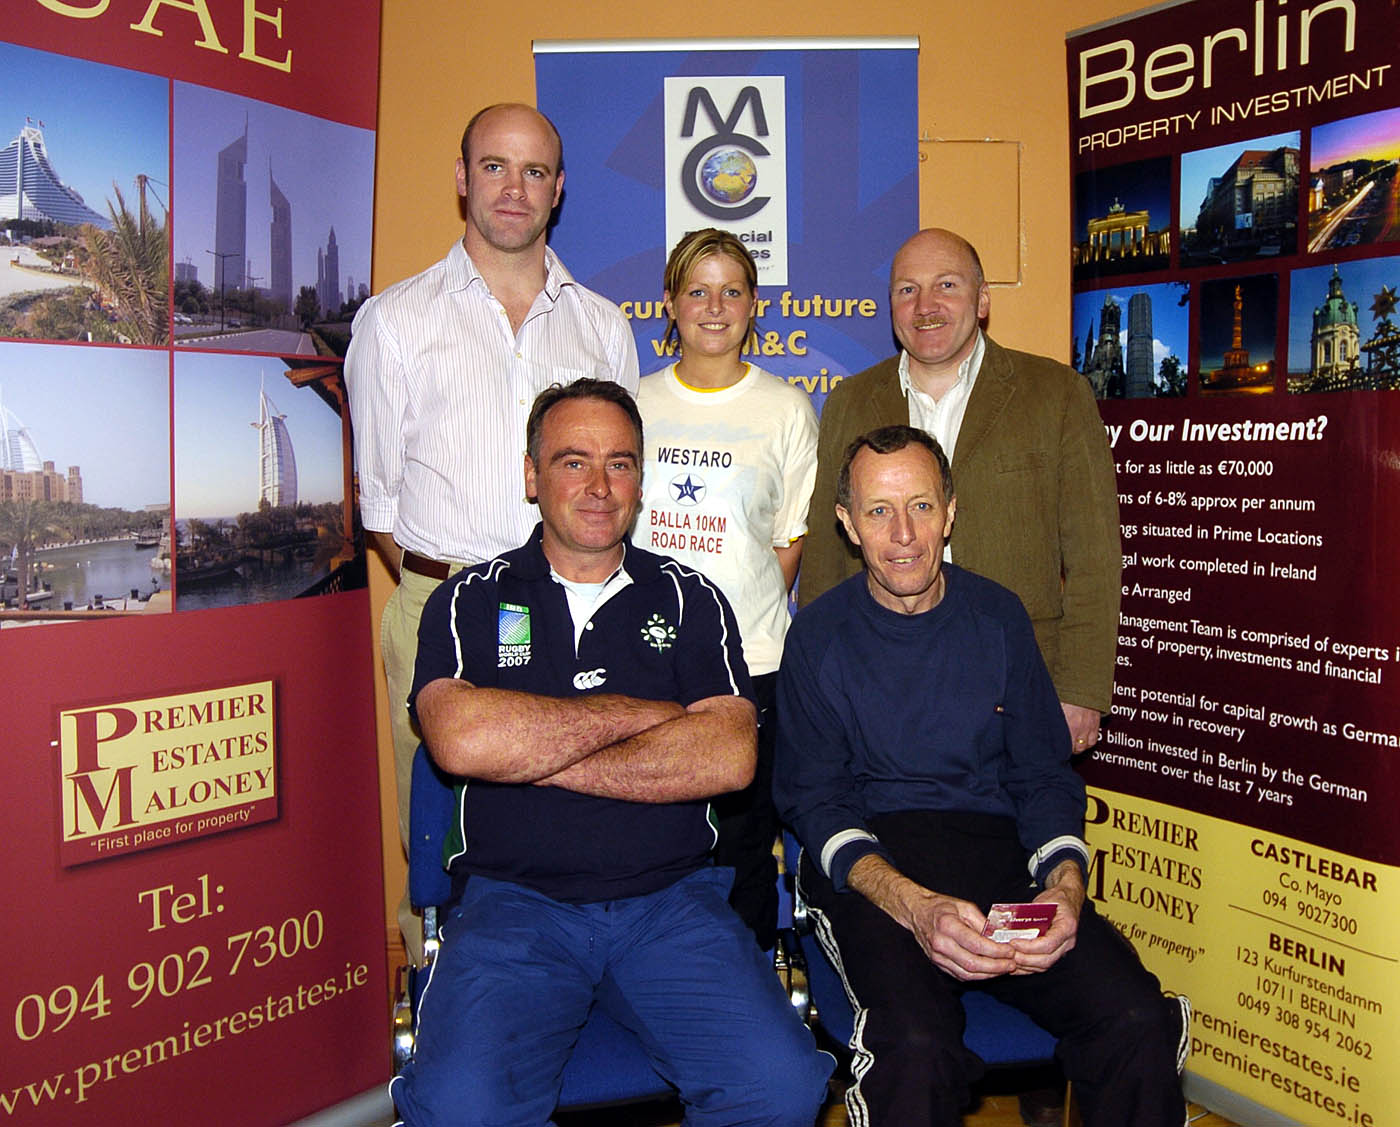 Balla 13th Annual 10K Road Race 2007, a group of winners of the Mens Over 50 Section pictured with some of the sponsors Front L-R: Jimmy Finnegan 3rd, Vincent Flannery 1st Sligo AC. Back L-R: Clive Casey Premier Estates Maloney, Sponsor Denise McIntyre Elvery Sports, Sponsor Tom Connolly Premier Estates Maloney Sponsor. Photo  Ken Wright Photography 2007